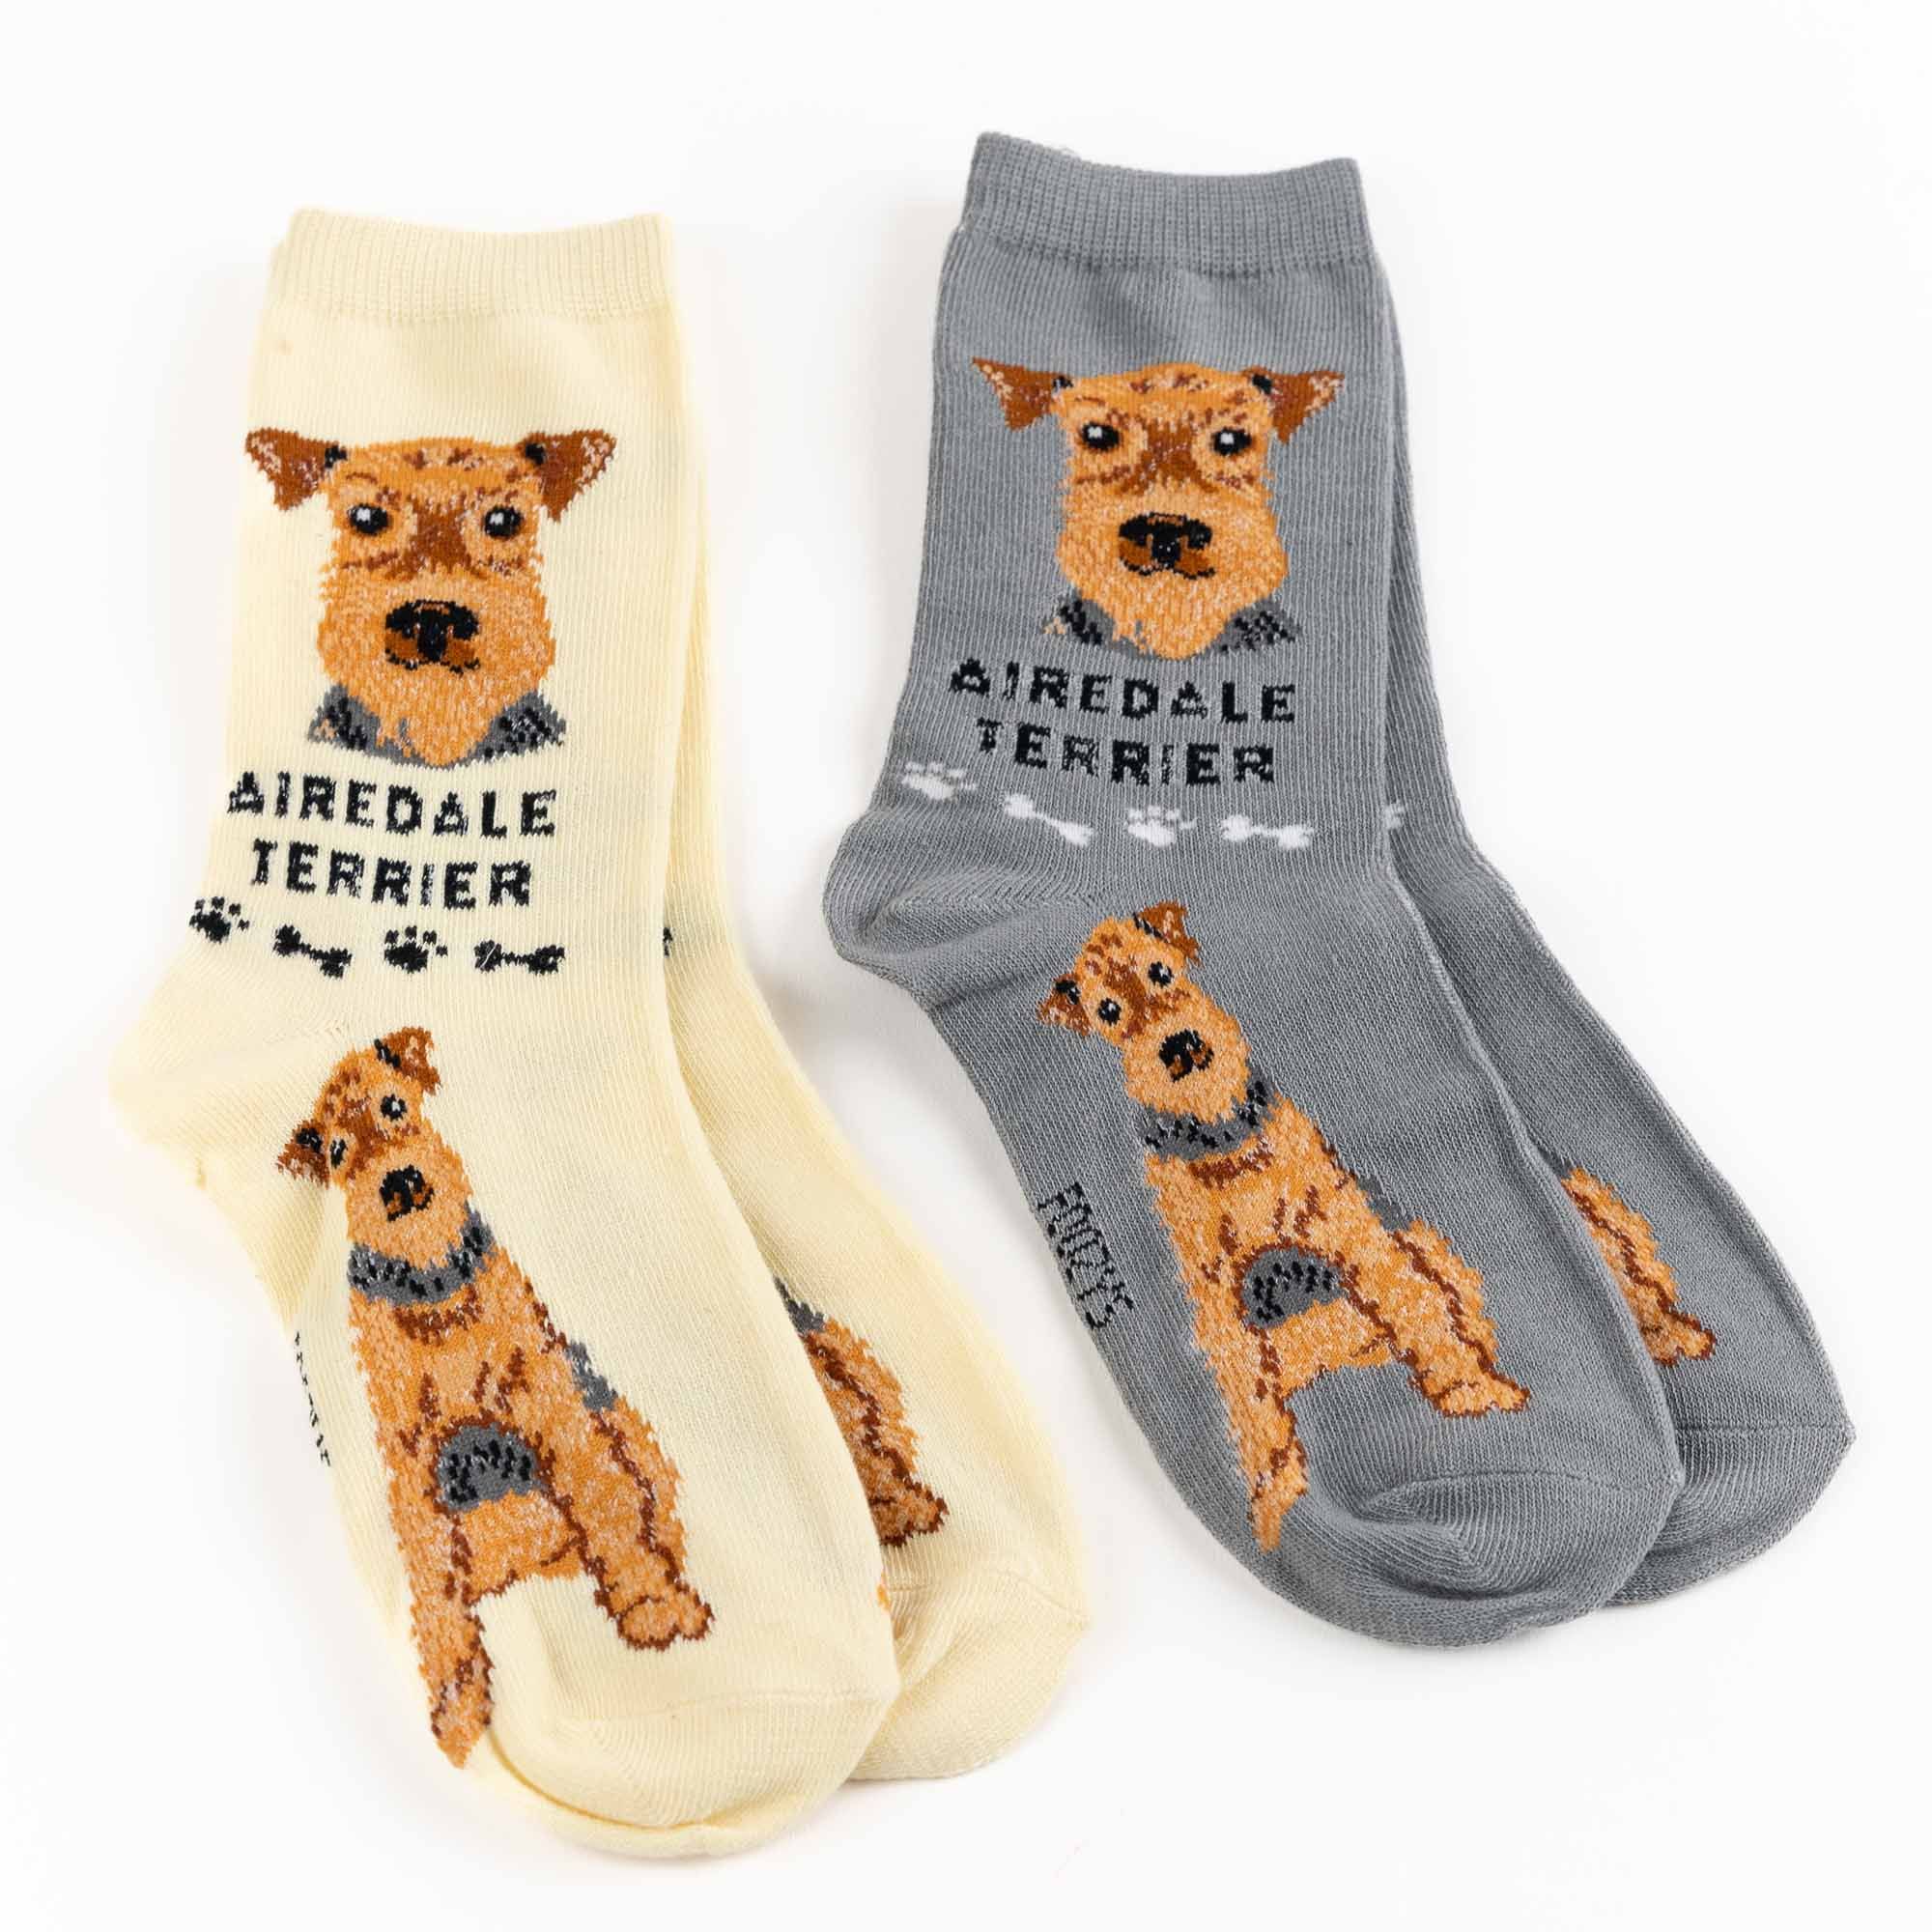 My Favorite Dog Breed Socks ❤️ Airedale Terrier  - 2 Set Collection